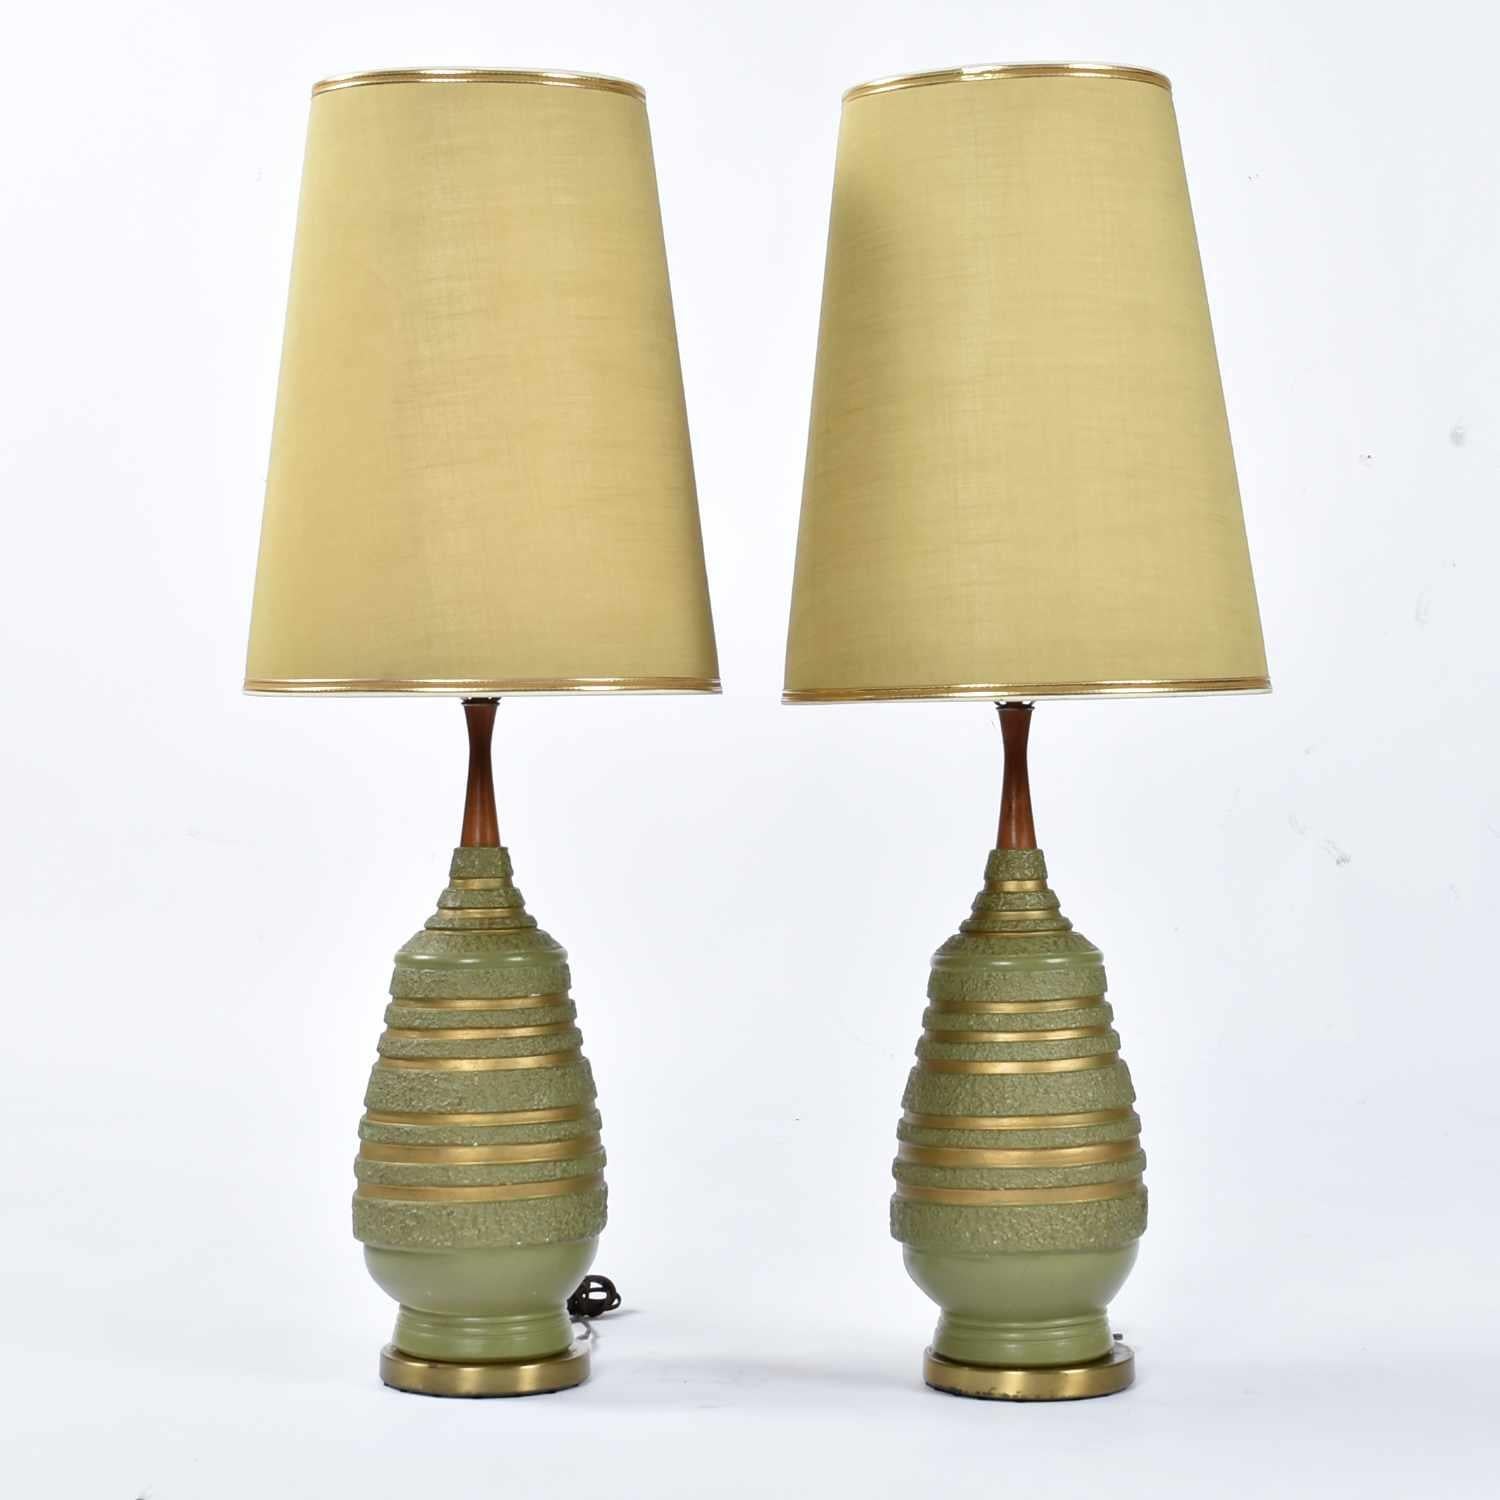 Incredible complete pair of Mid-Century Modern avacado green lamps by Plasto. These have got to be some of the most authentic Mid-Century lamps around. It is quite rare to find lamps with their original shades. These green, conical shades are